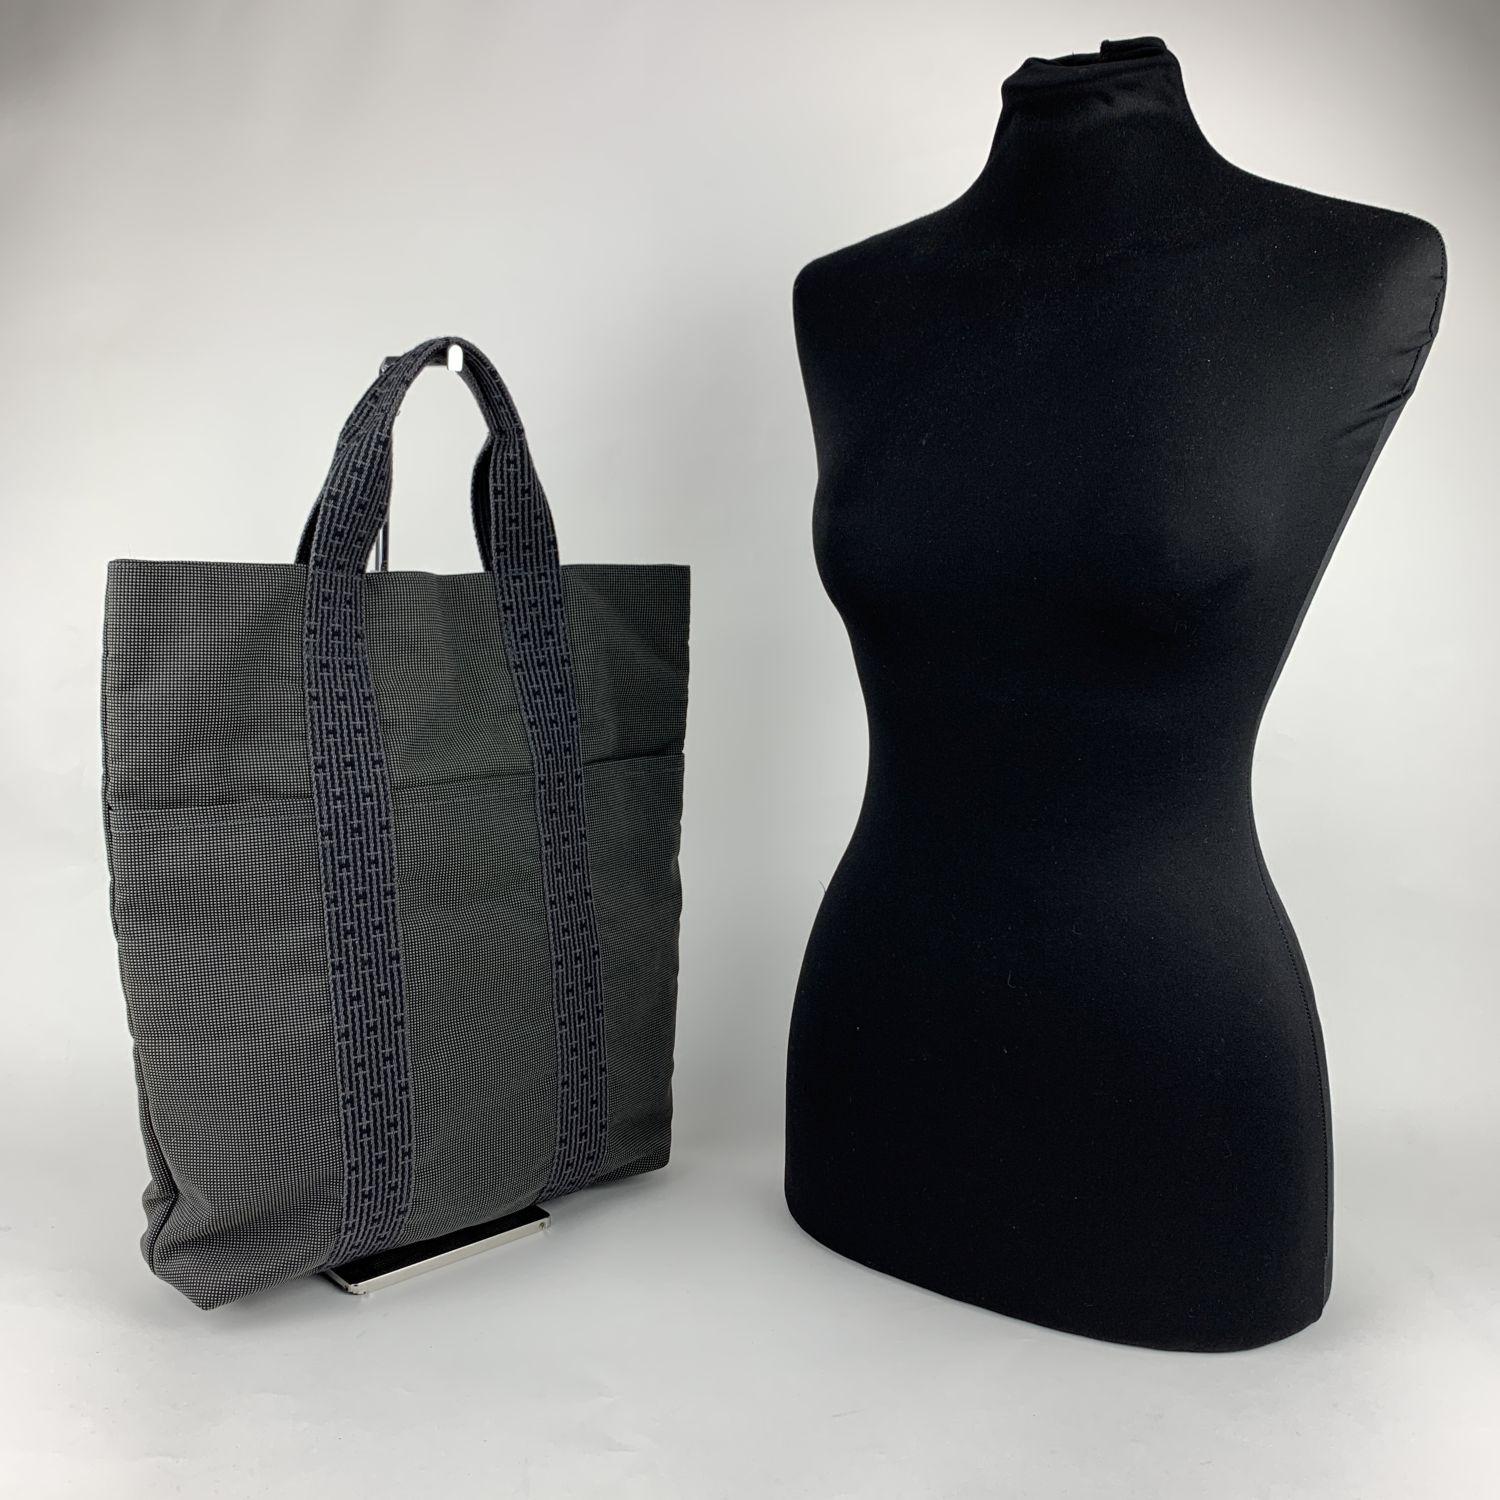 Hermes Grey Canvas Herline Her Line Shopping Bag. Made of a durable canvas. The tote has durable strap handles of a patterned Hermes H canvas. 3 open pockets on the front. Composition; 69% Polyamide, 31% Polyester. Upper zipper closure. Canvas